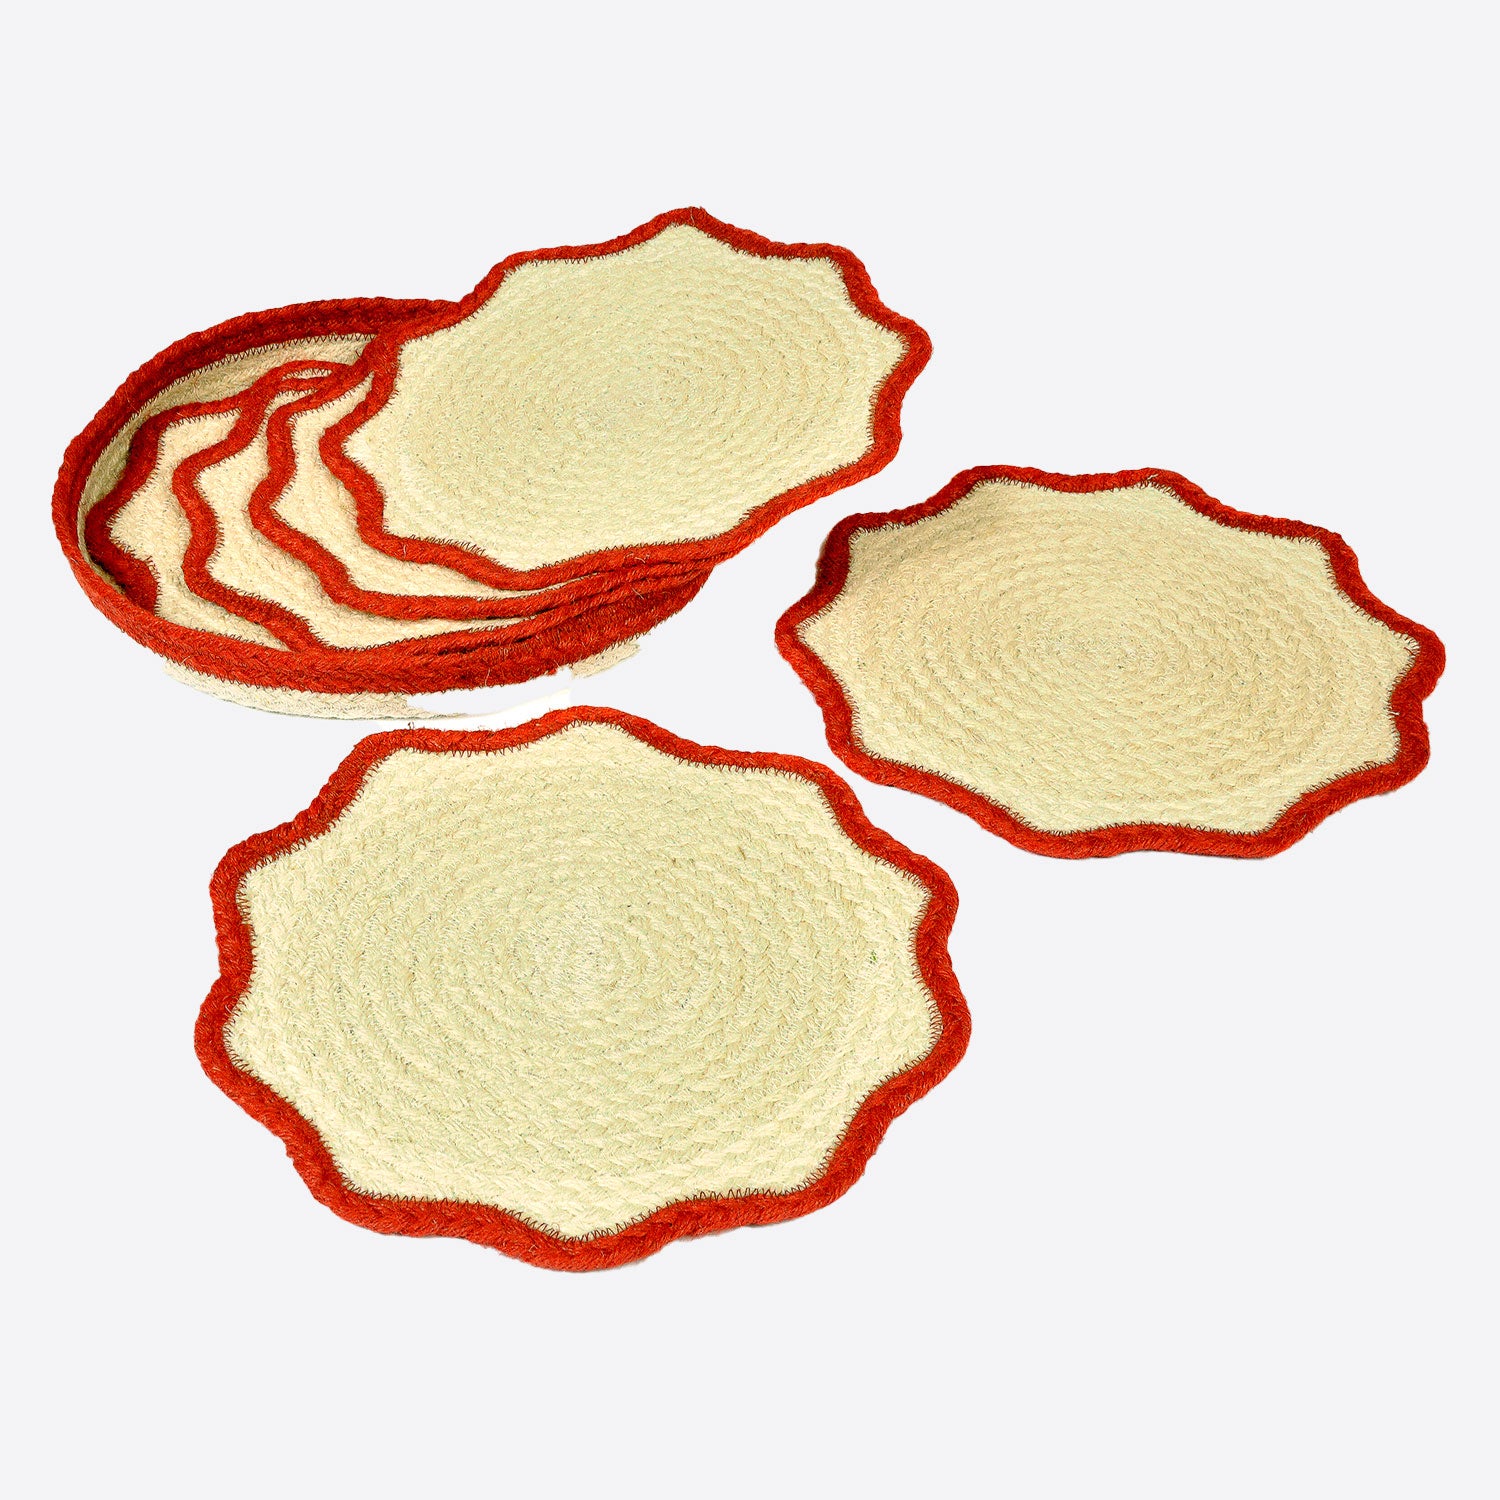 Set 6 Red Placemats in Basket Joanna Wood Shop